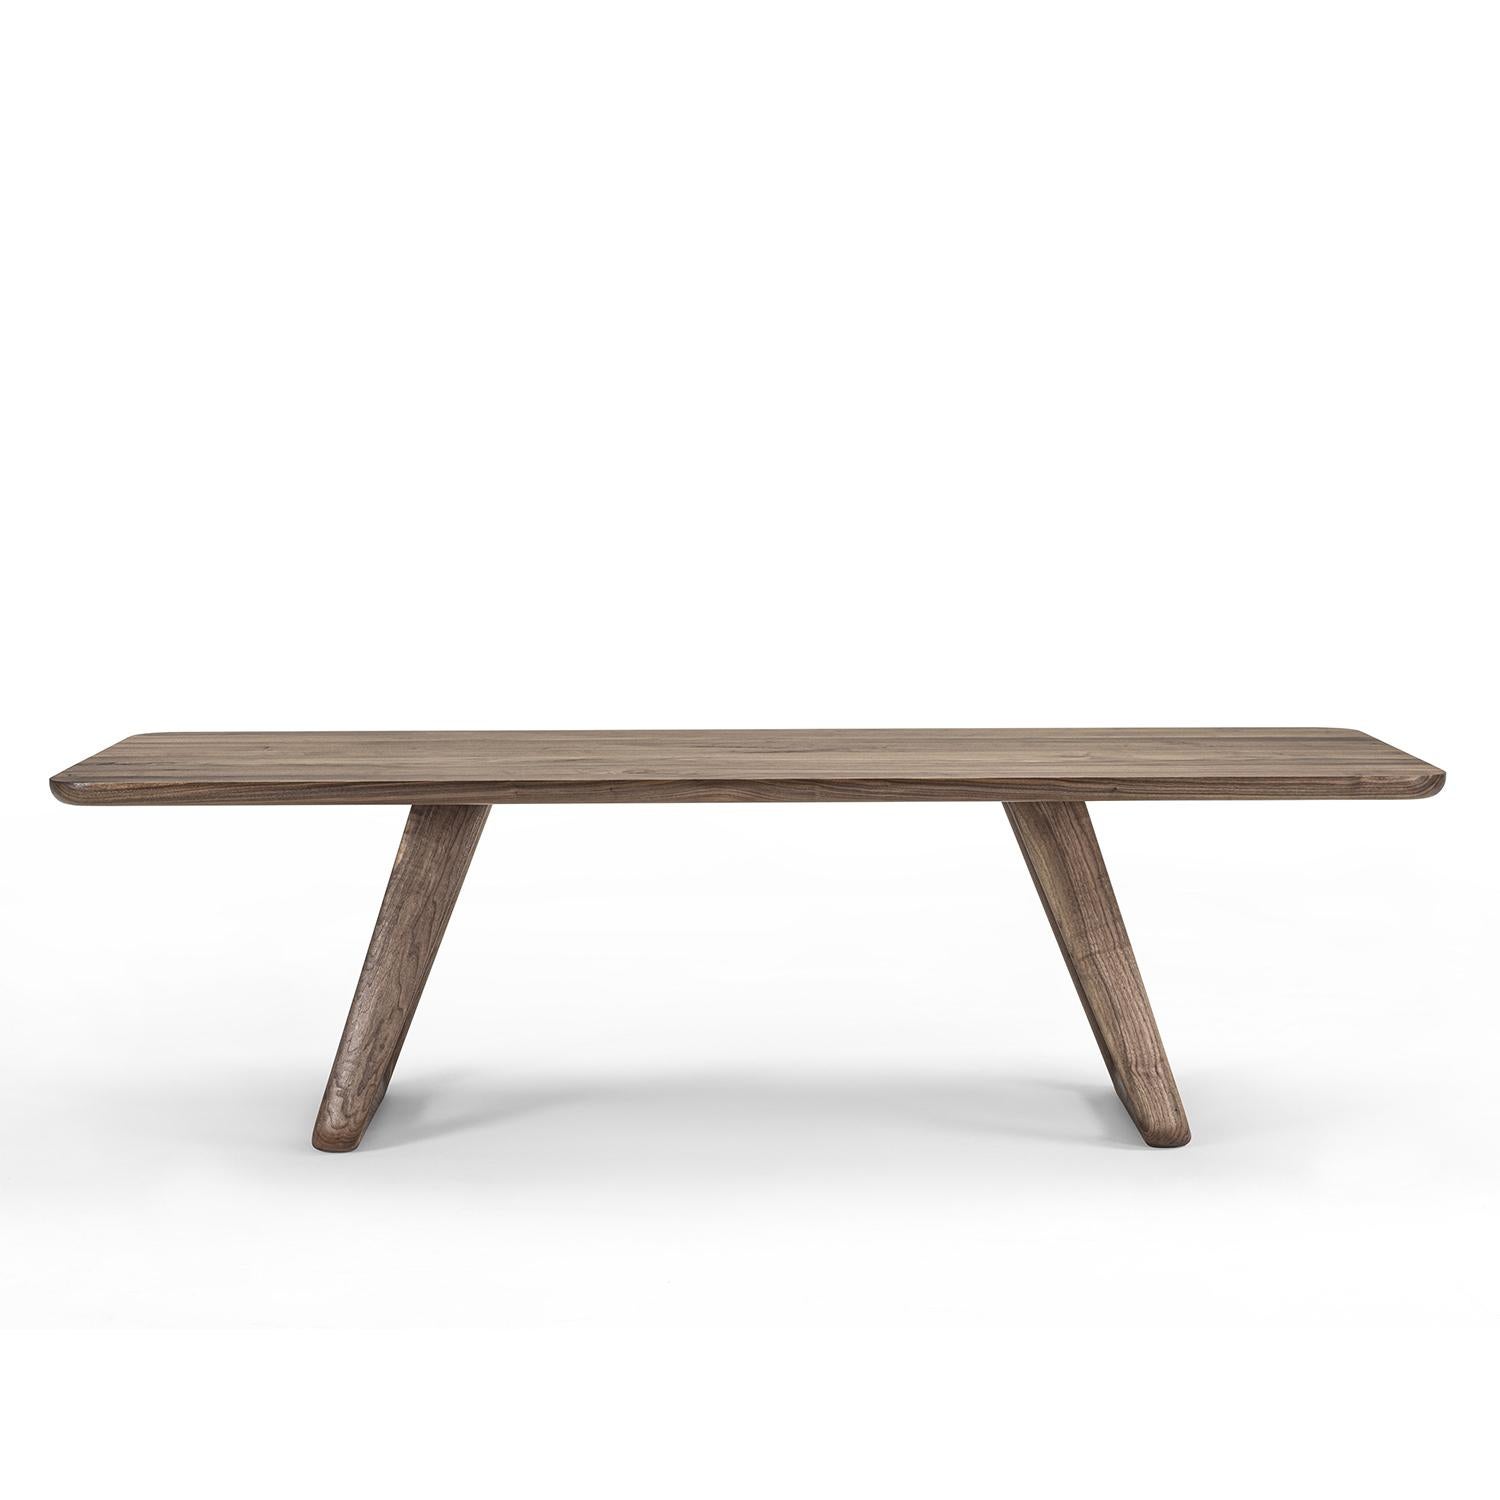 Dining Table Equa with all structure in solid 
walnut wood, top with bevelled edges.
Available on request in:
L220xD100xH75cm, price: 13400,00€
L240xD100xH75cm, price: 13900,00€
L260xD100xH75cm, price: 14900,00€
L280xD100xH75cm, price: